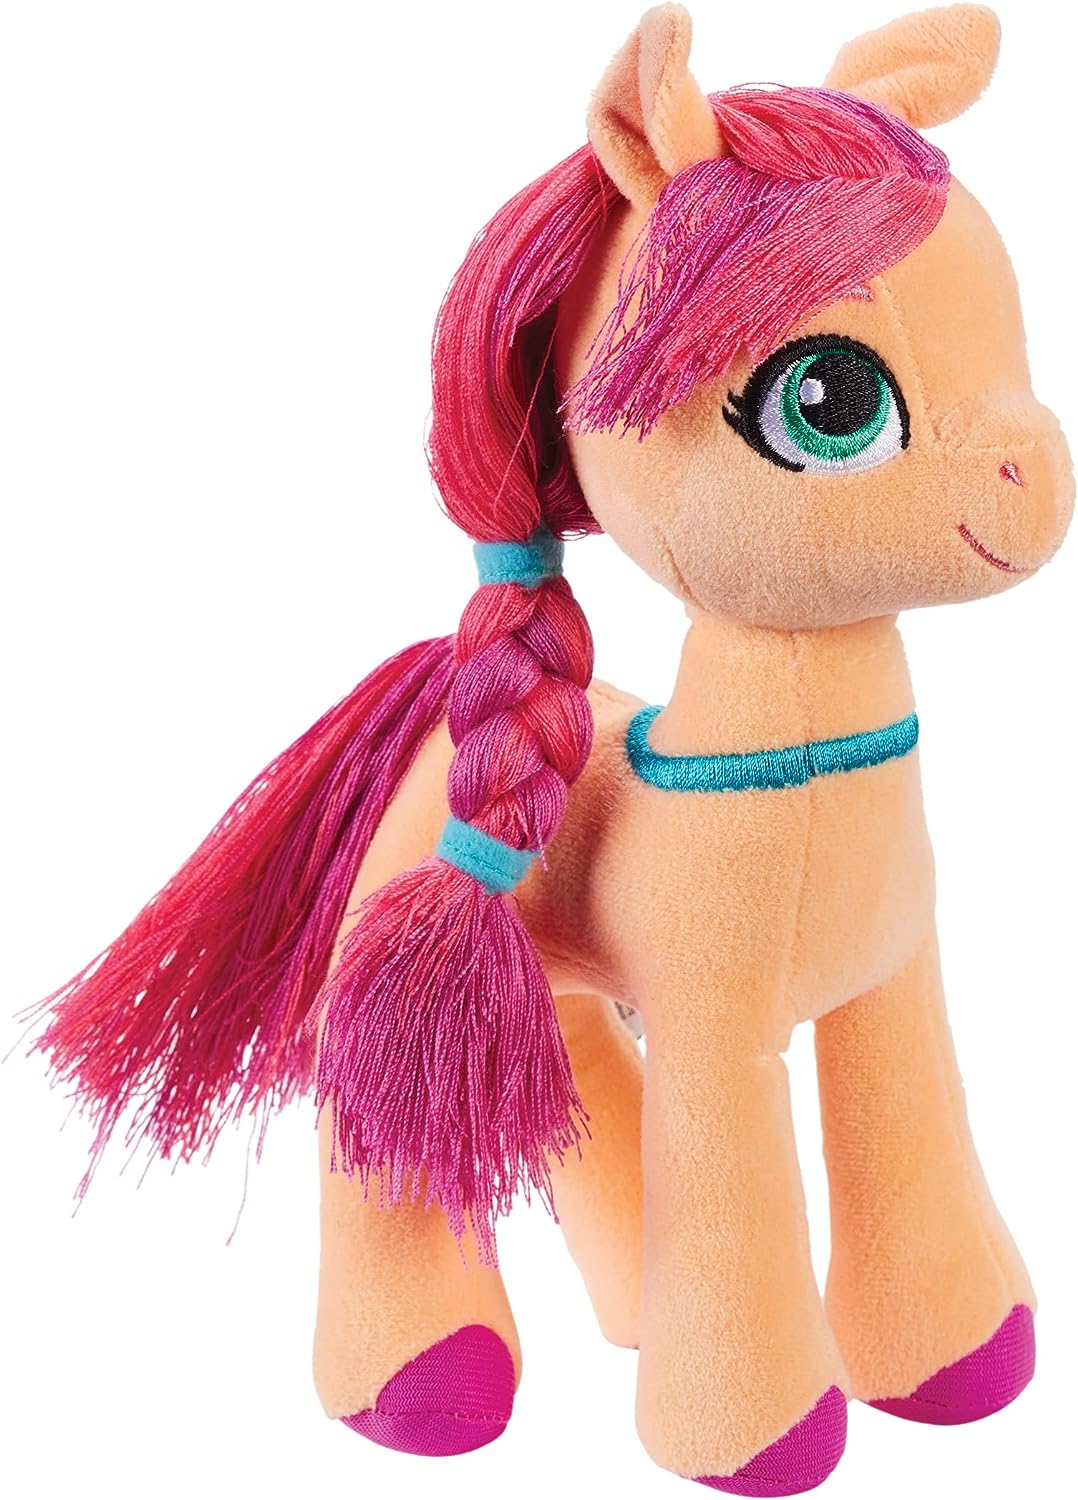 My Little Pony Izzy Eco Soft Toy, 100% Recycled materials, My Little Pony Gift